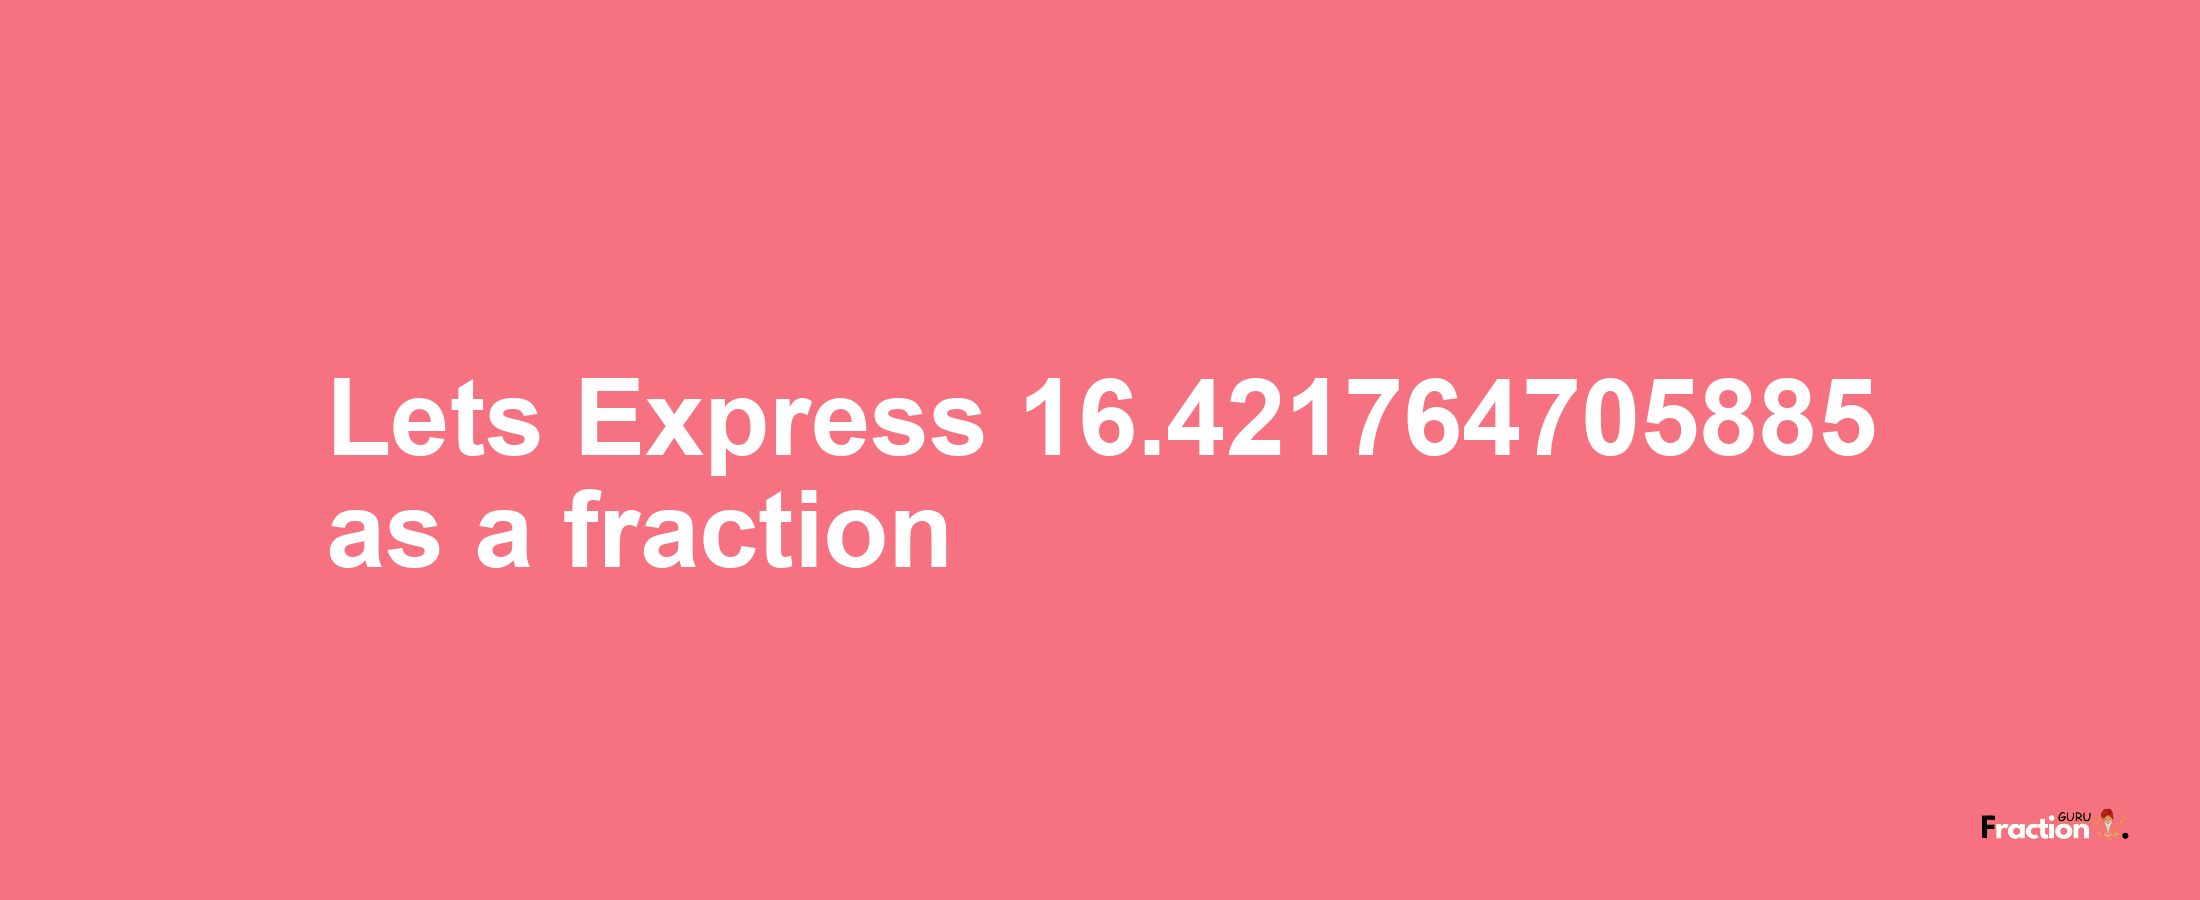 Lets Express 16.421764705885 as afraction